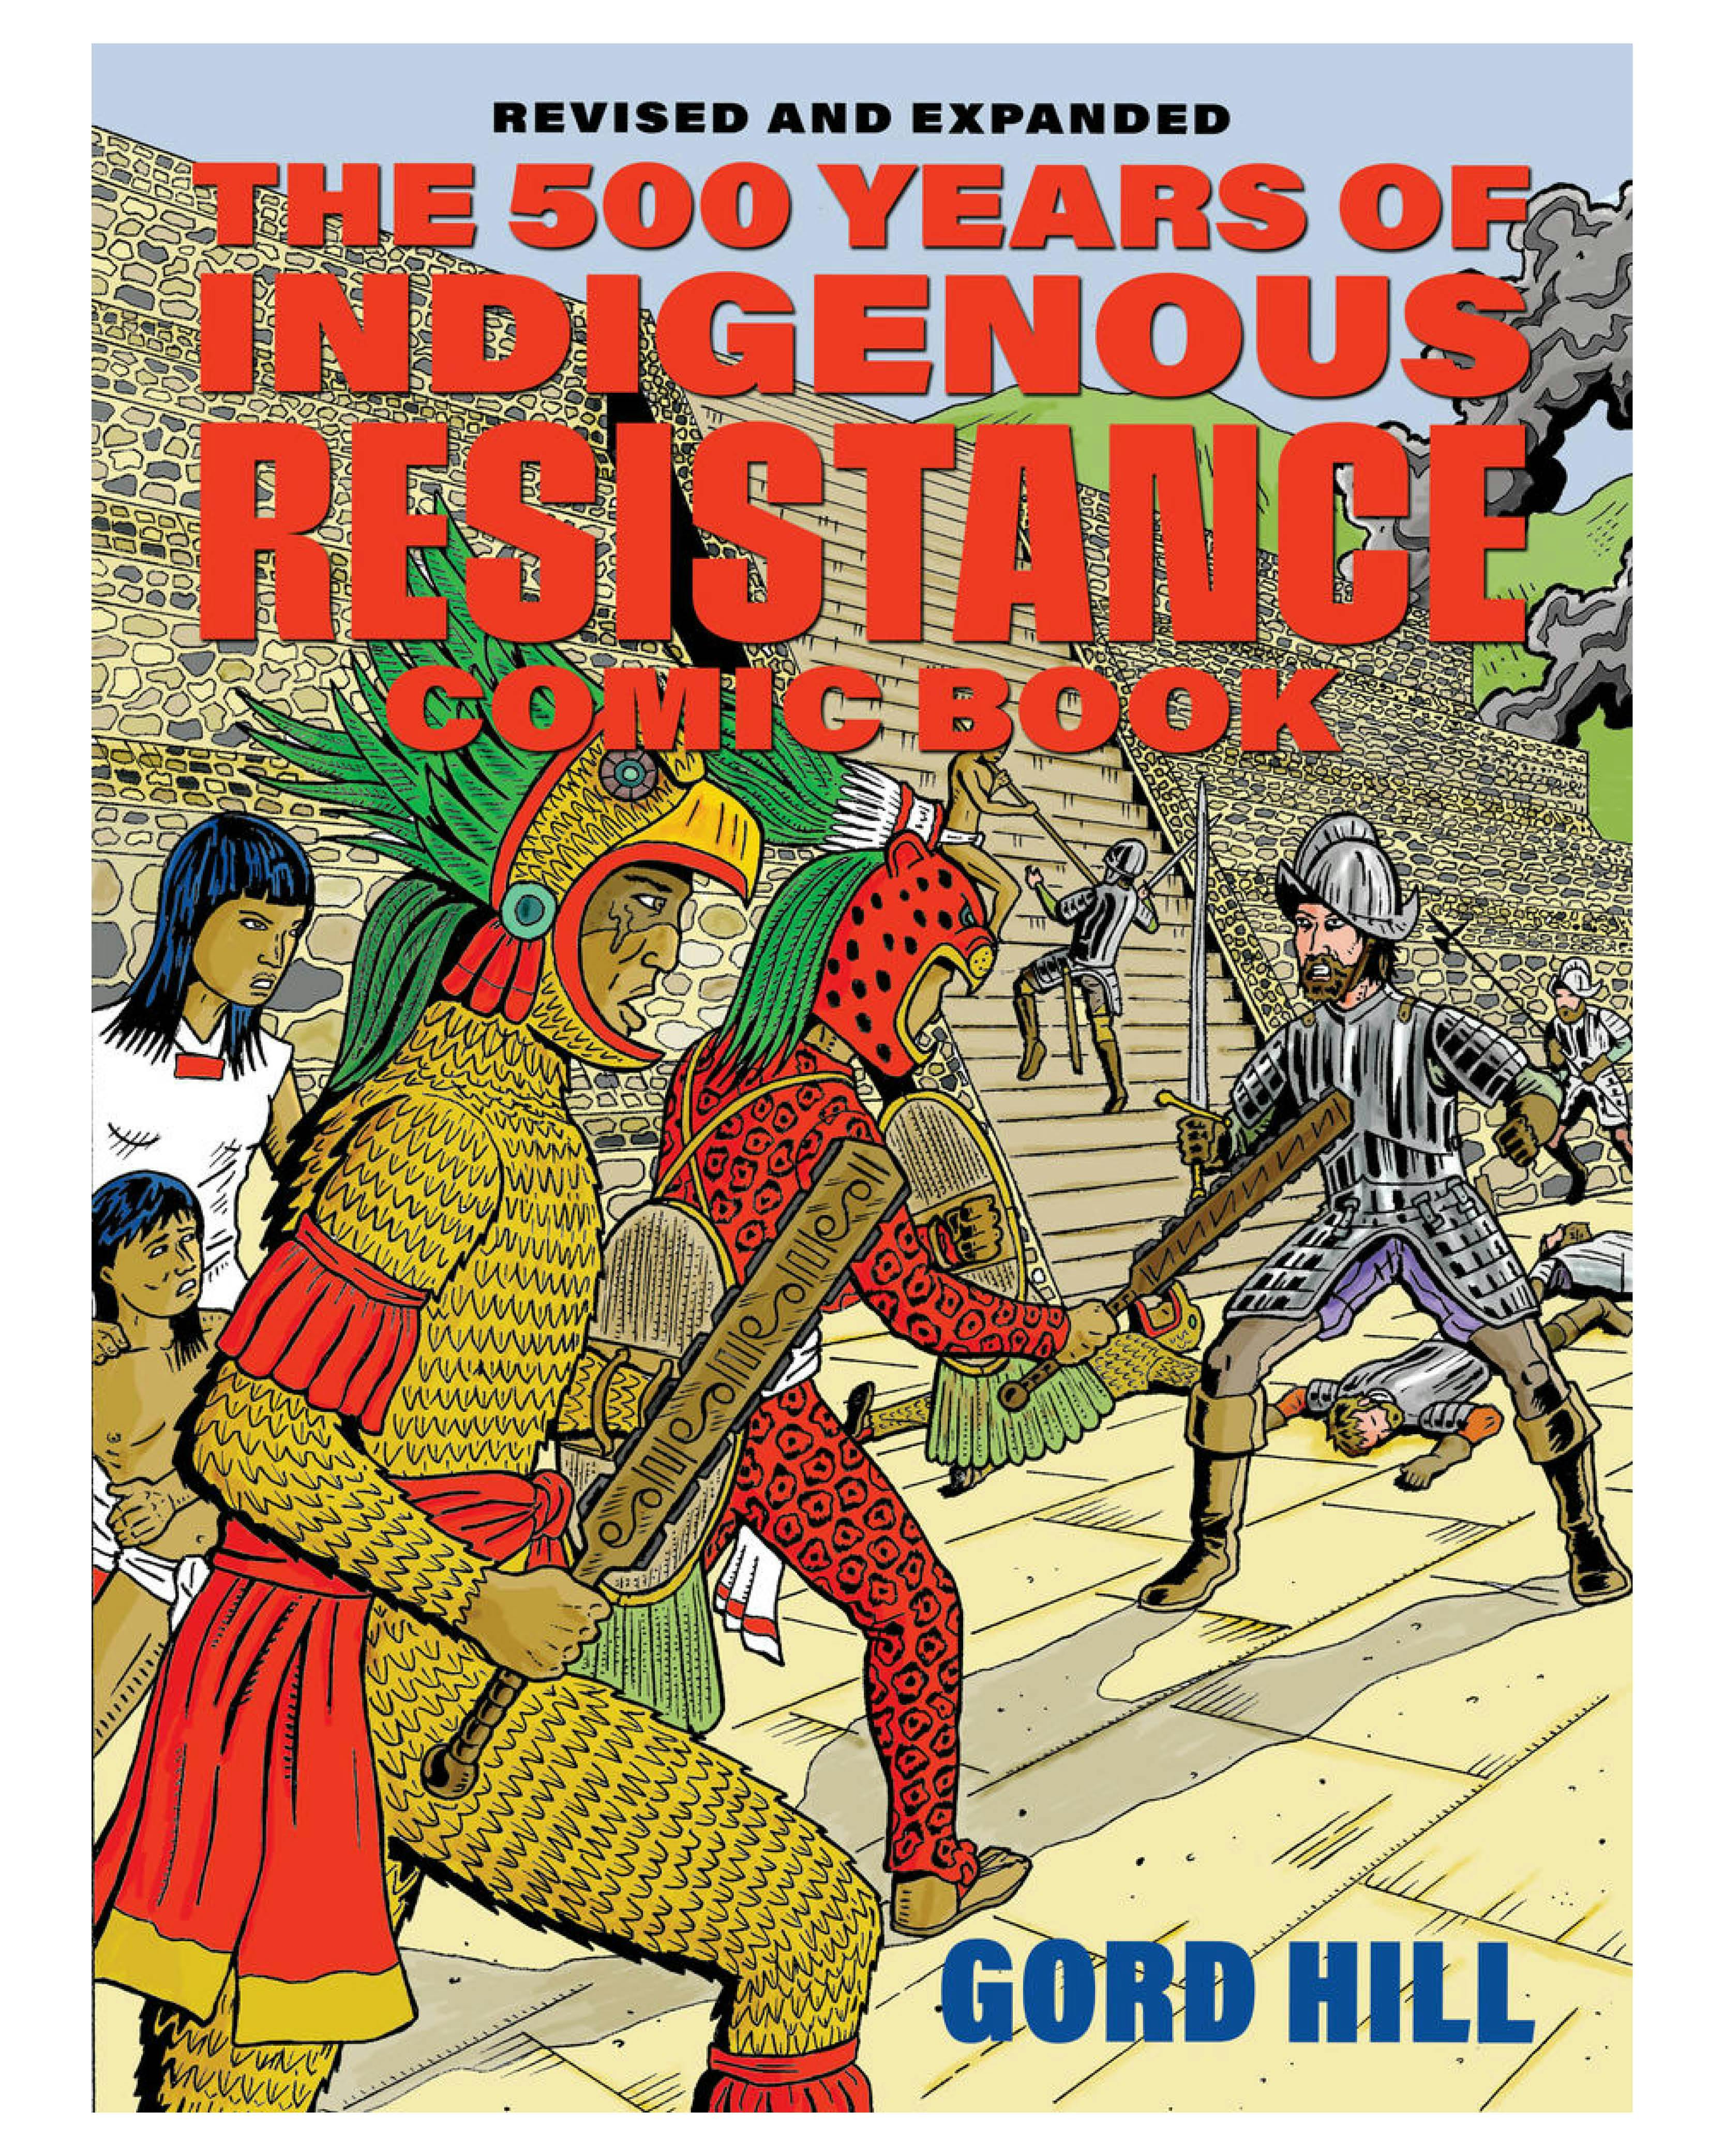 A cover of a comic graphic novel titled The 500 Years of Resistance Comic Book by Gord Hill. It illustrates a physical fight between indigenous people and western colonizers.